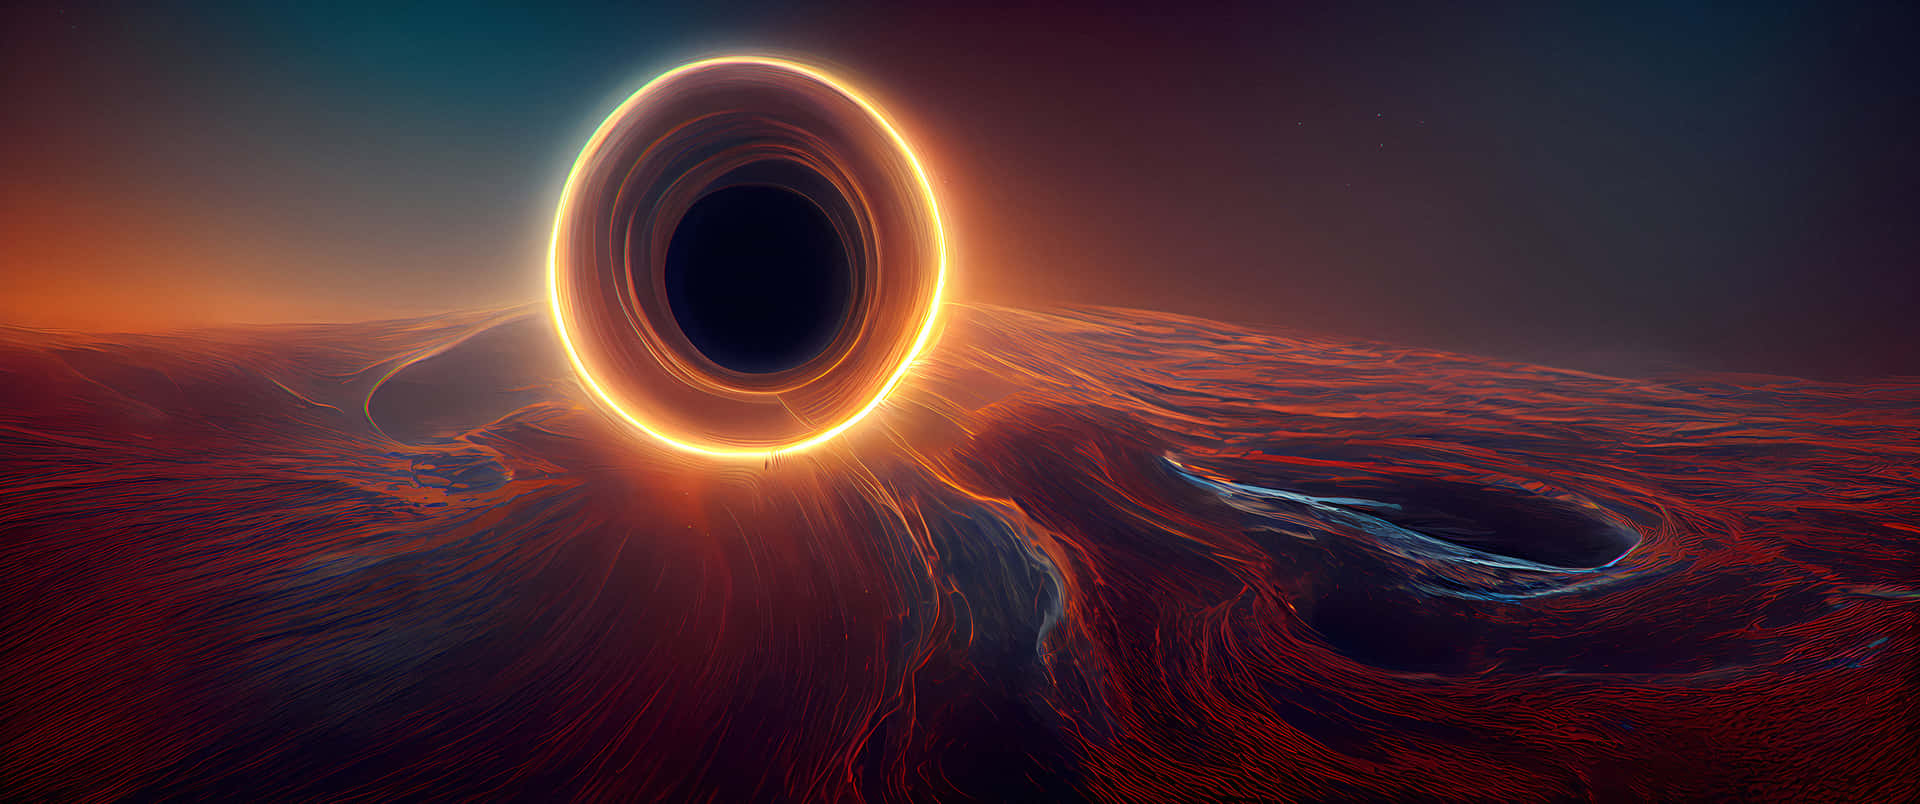 A Black Hole In The Middle Of A Dark Space Wallpaper